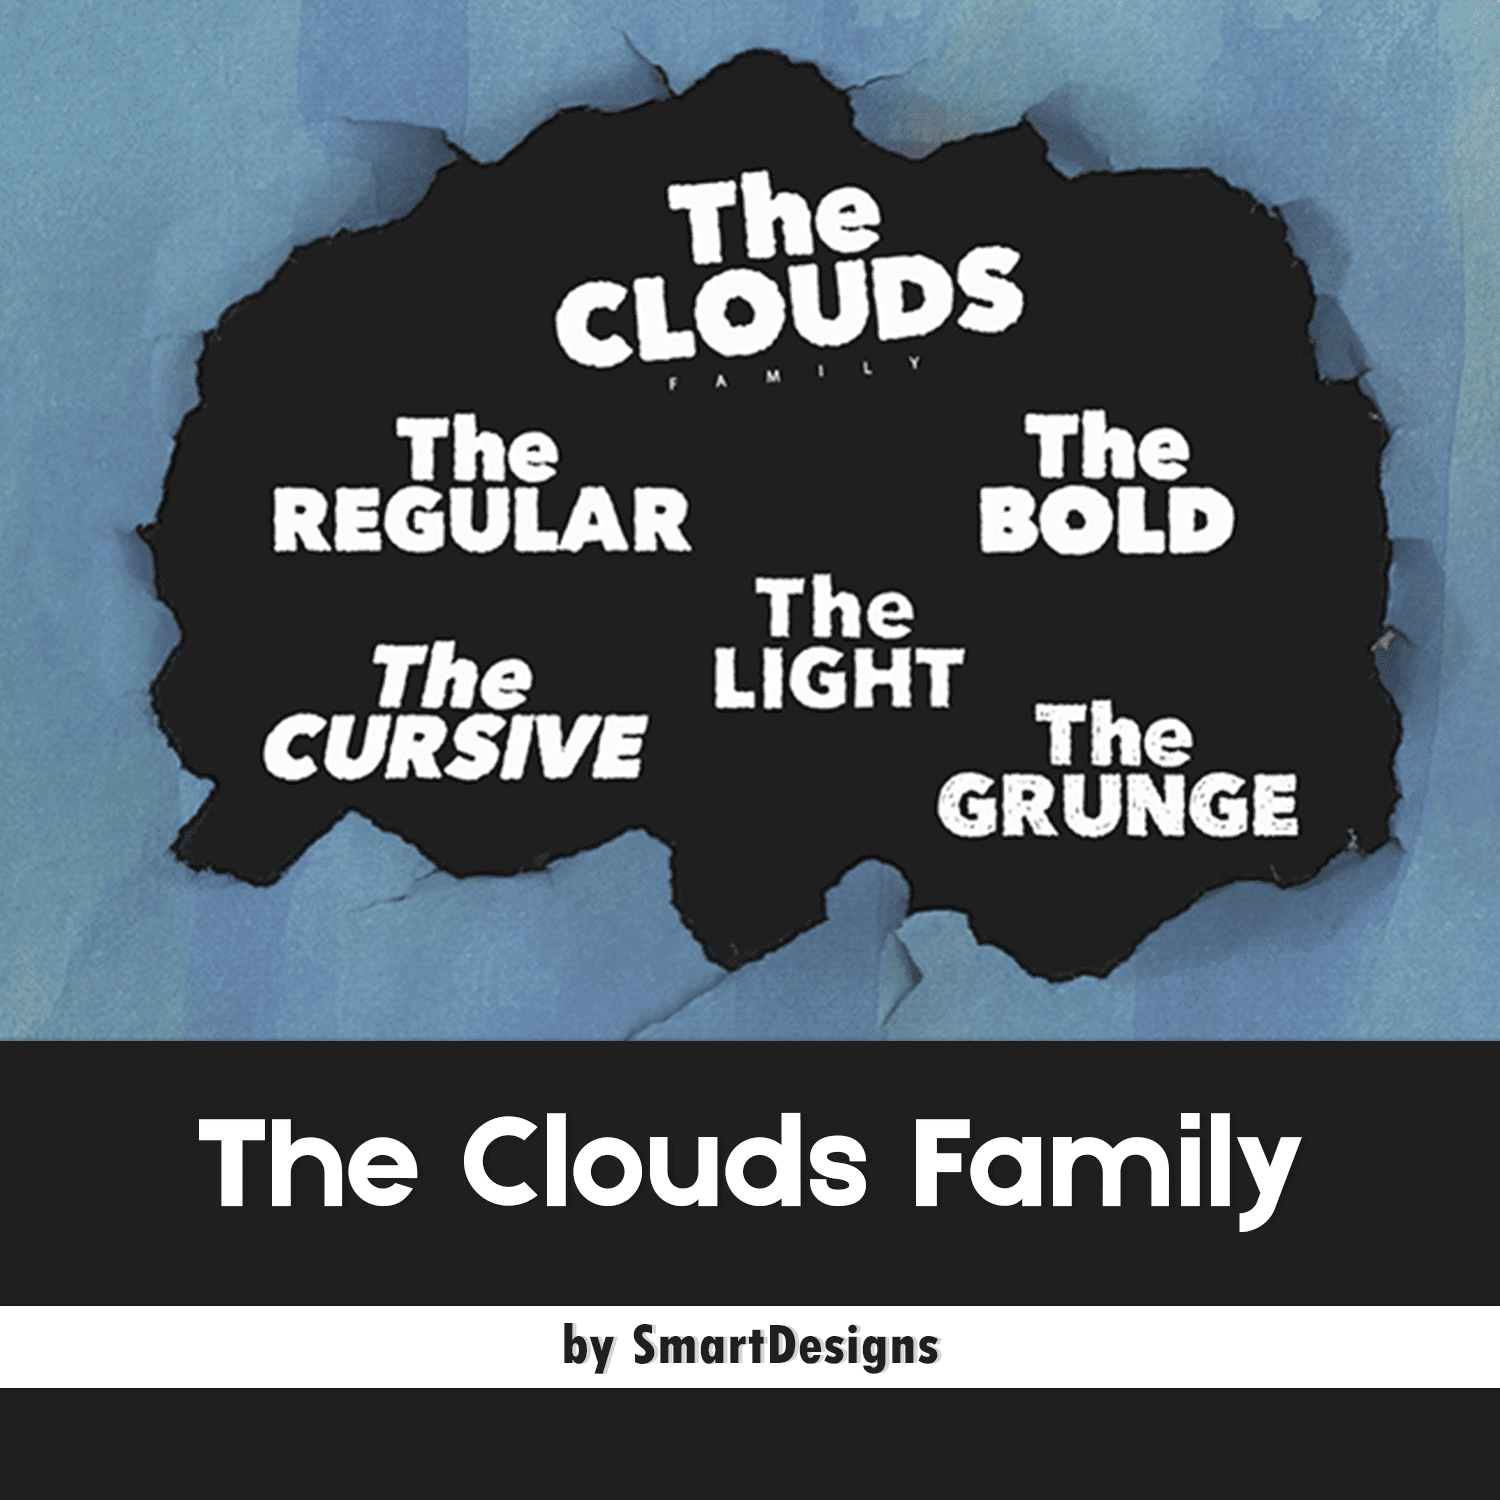 Preview the clouds family.